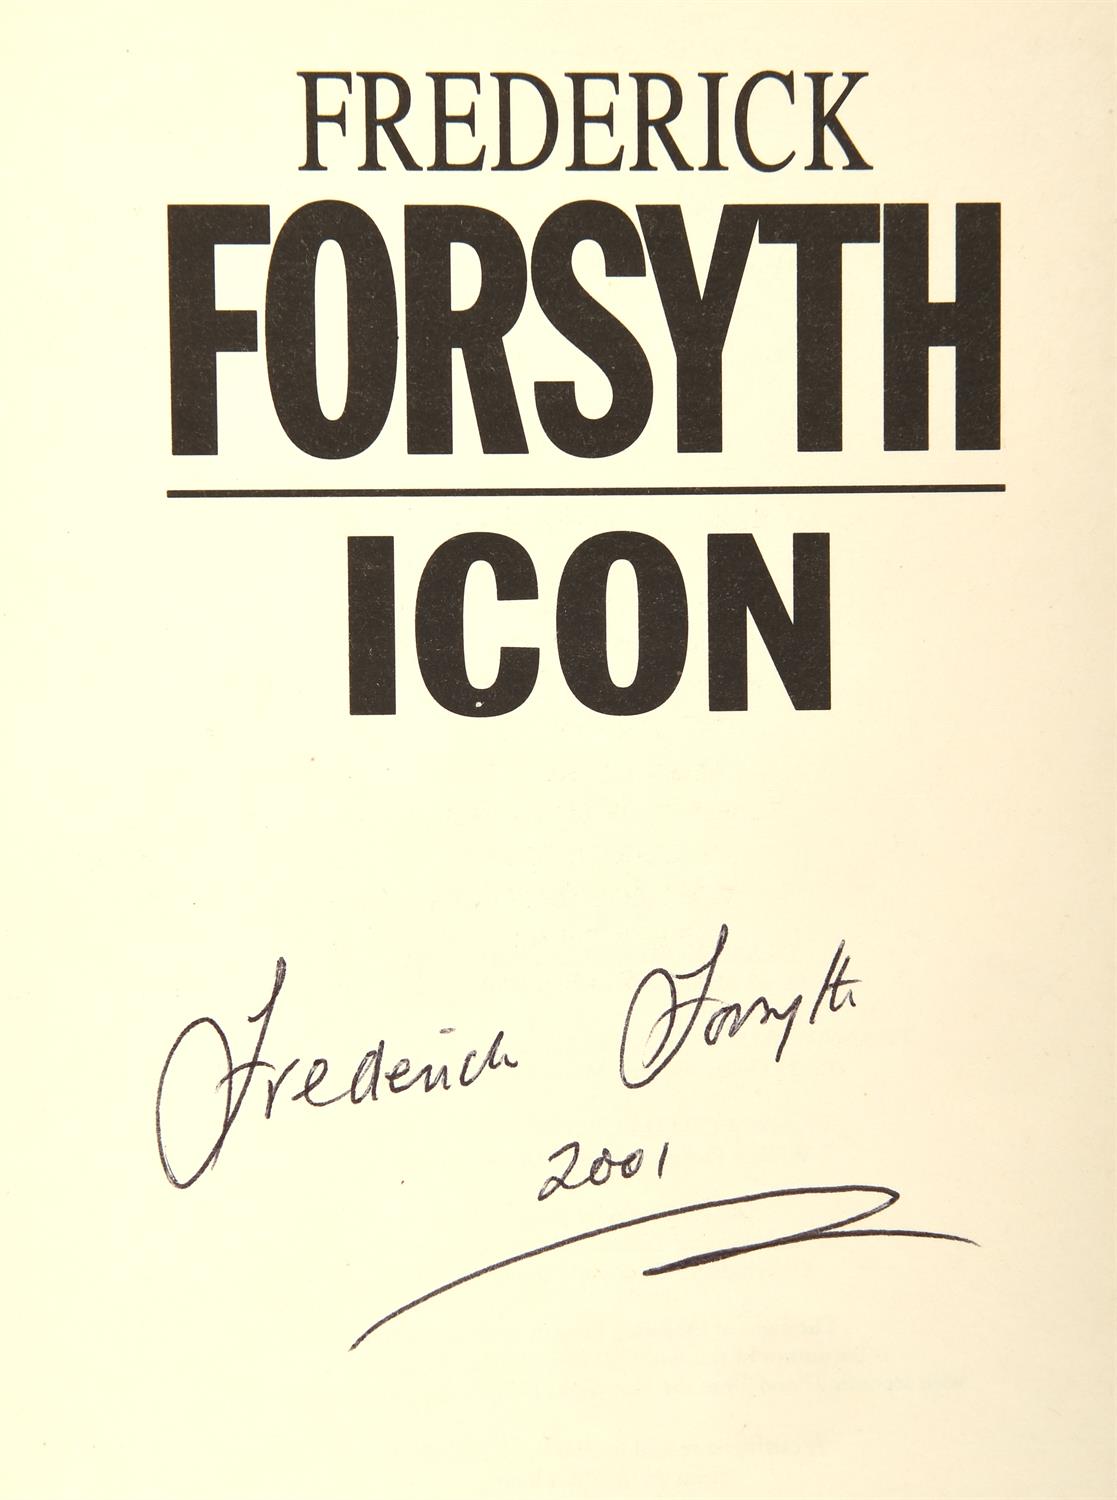 Frederick Forsyth and Dick Francis: Five Signed first edition hardback books - FORSYTH (Frederick). - Image 3 of 6